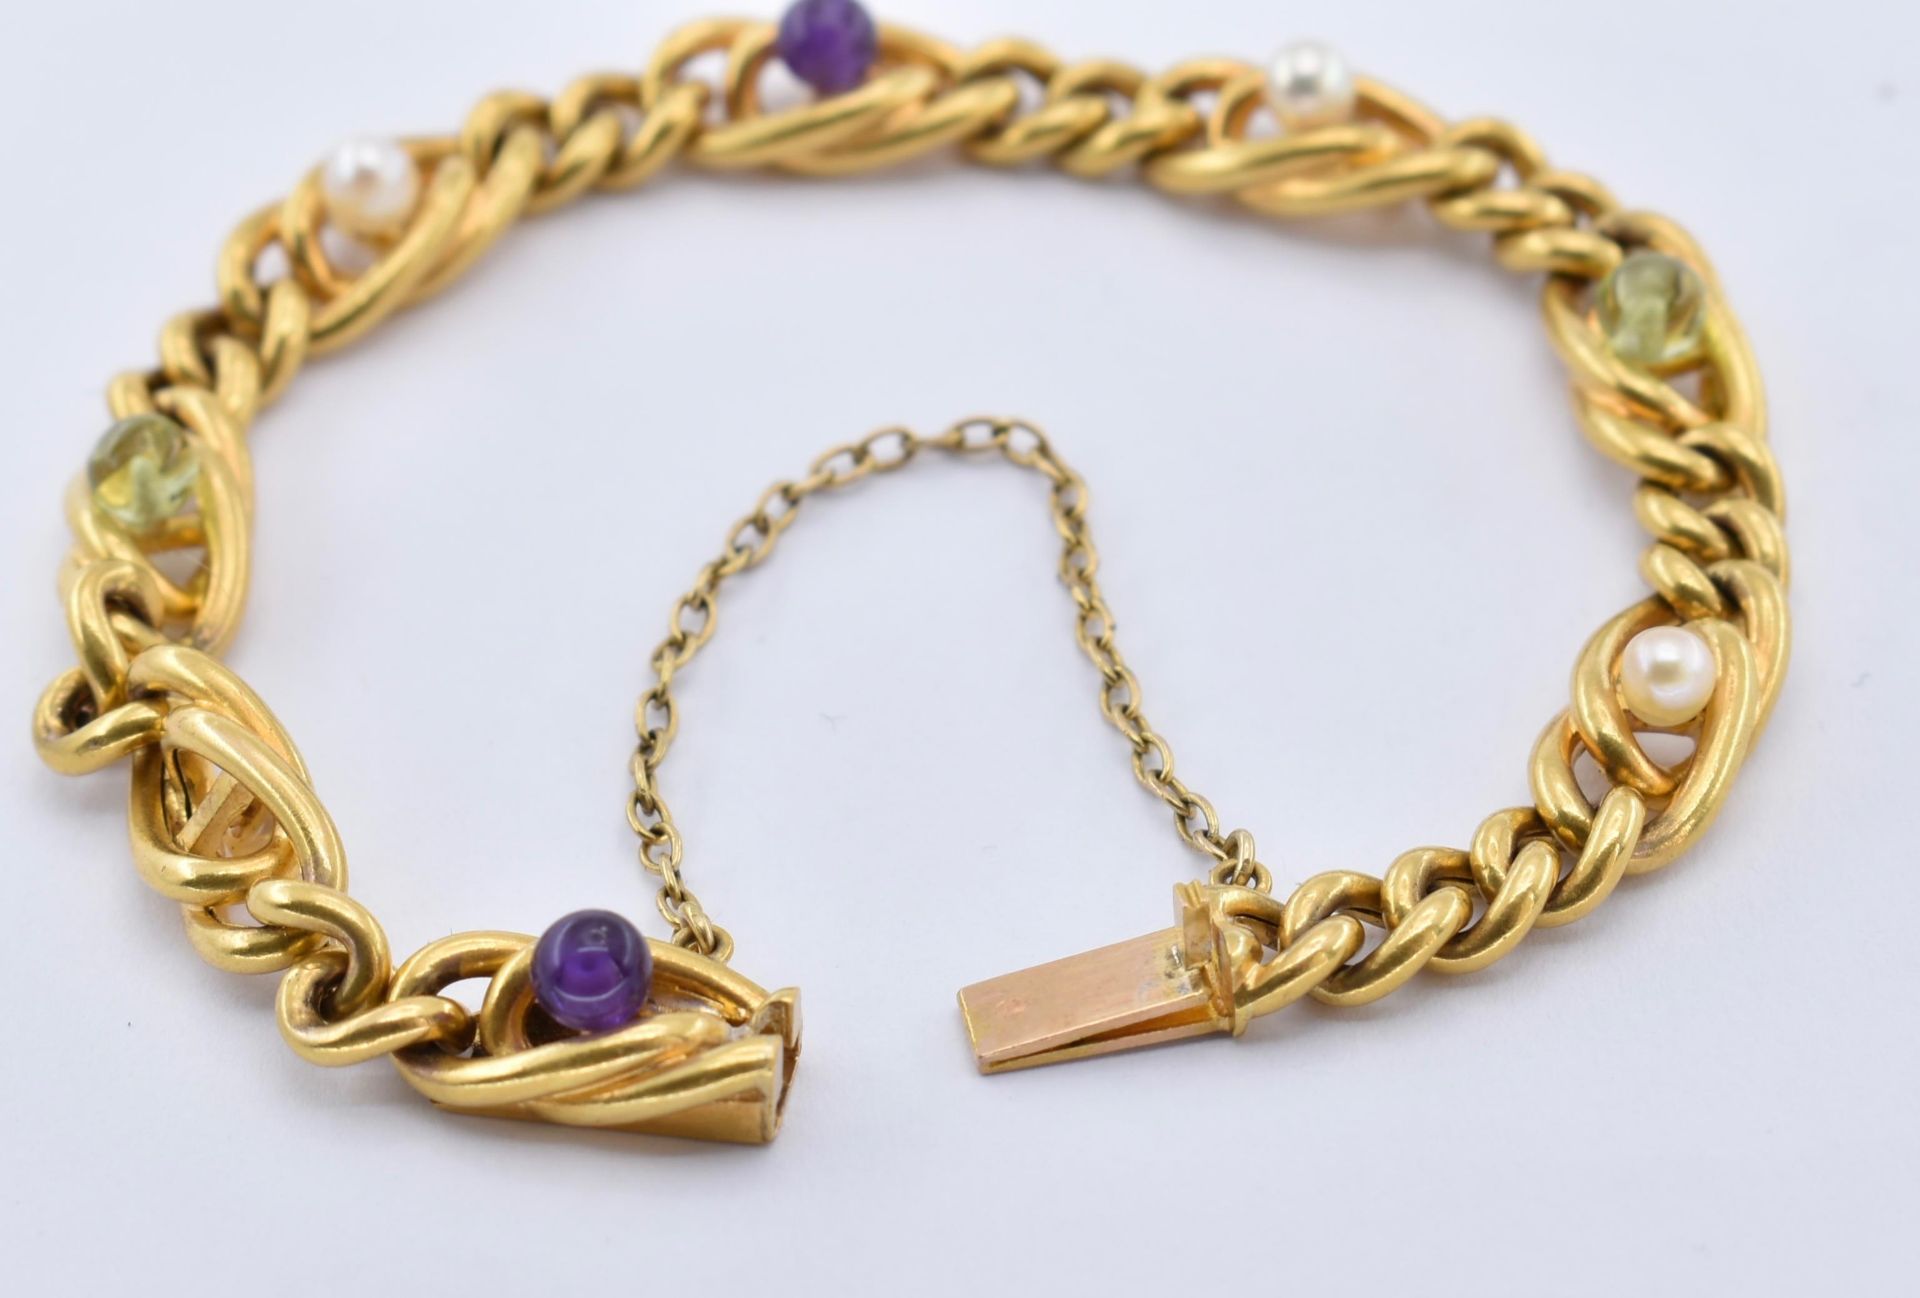 18CT GOLD PERIDOT PEARL AND AMETHYST BRACELET - Image 3 of 4